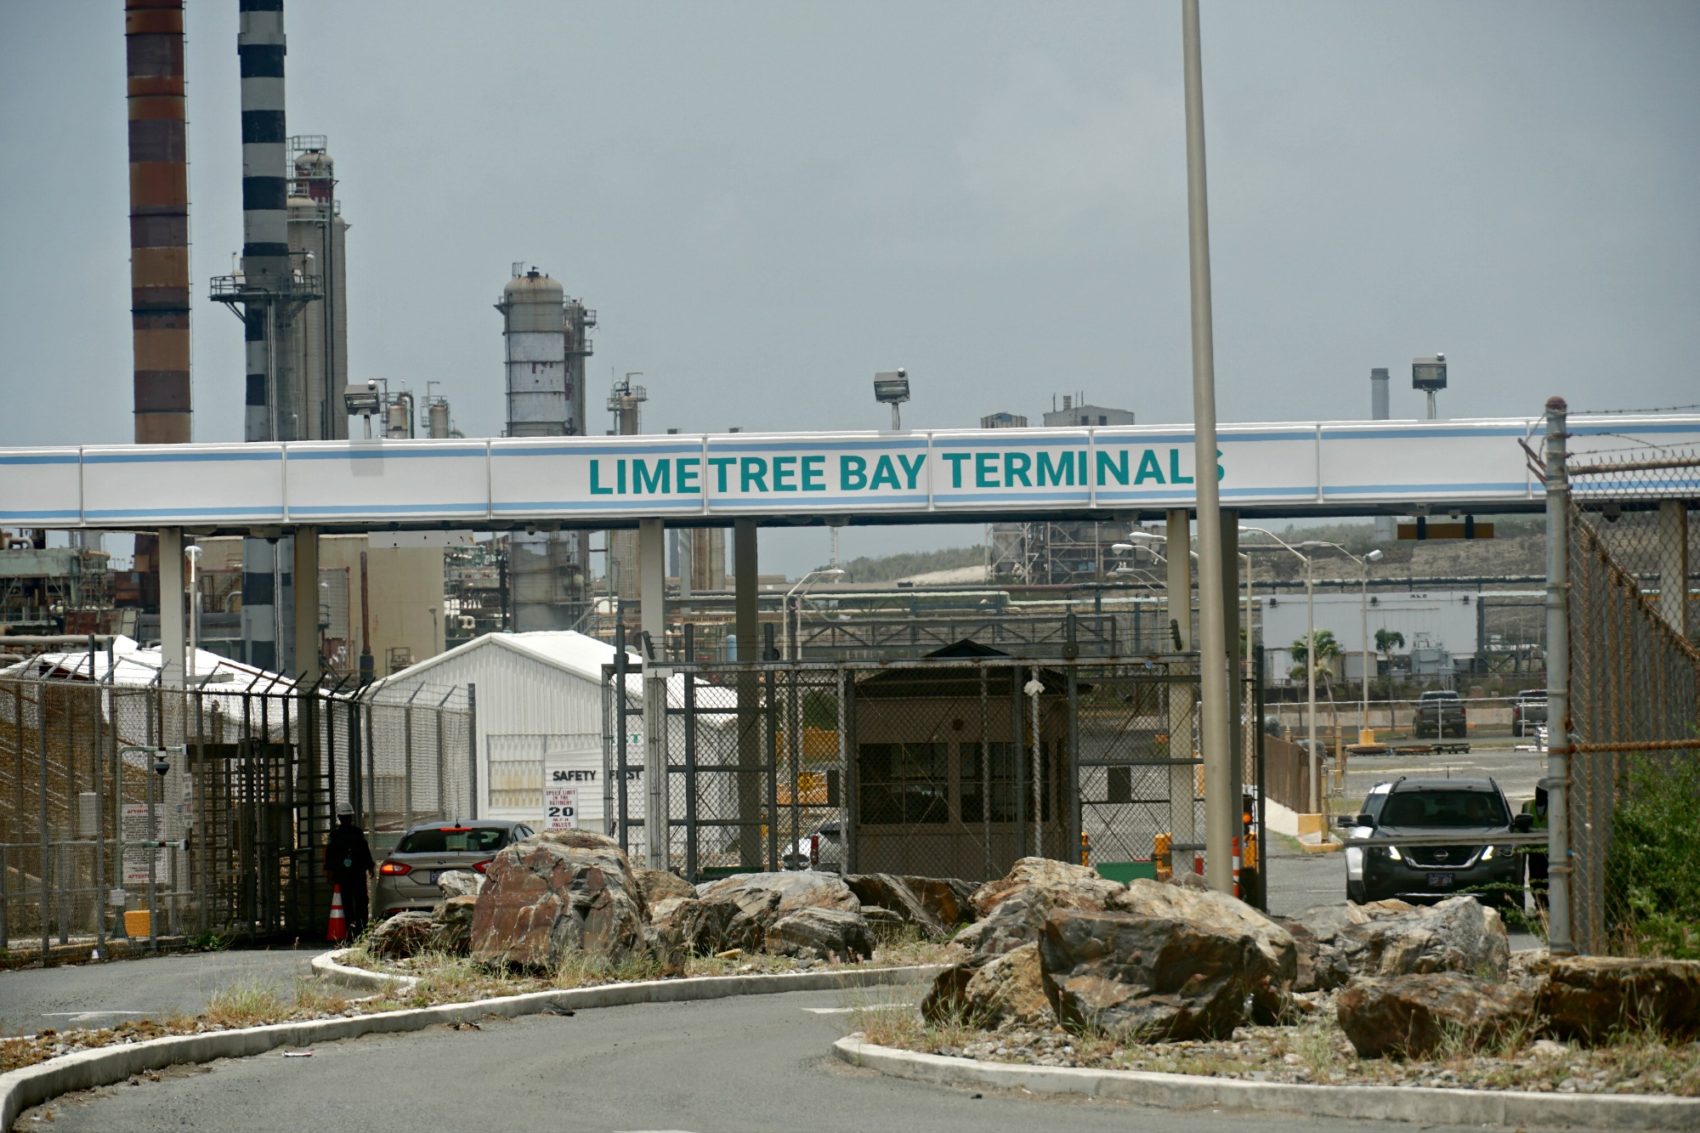 Some 1,300 Workers Have Arrived On St. Croix To Work At Limetree Bay Refining